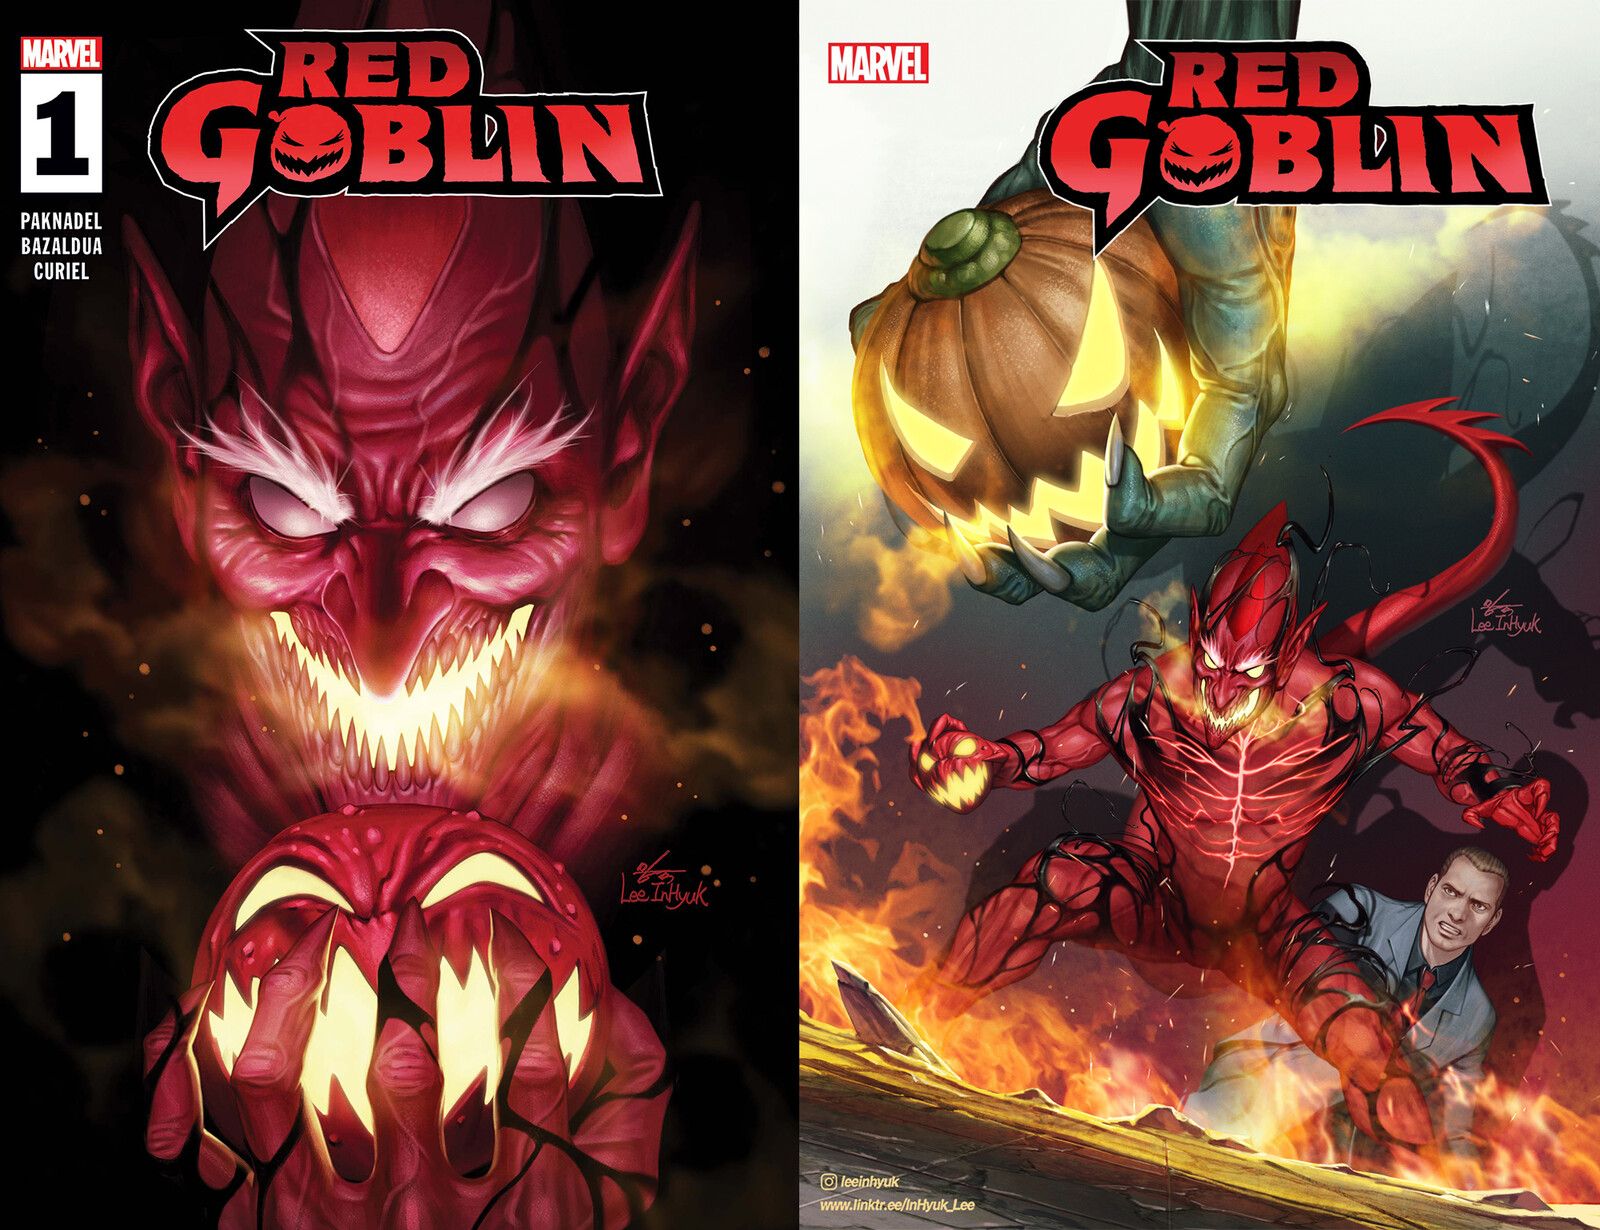 Red Goblin #1 and #2
https://www.instagram.com/p/CkwrfcXhomQ/